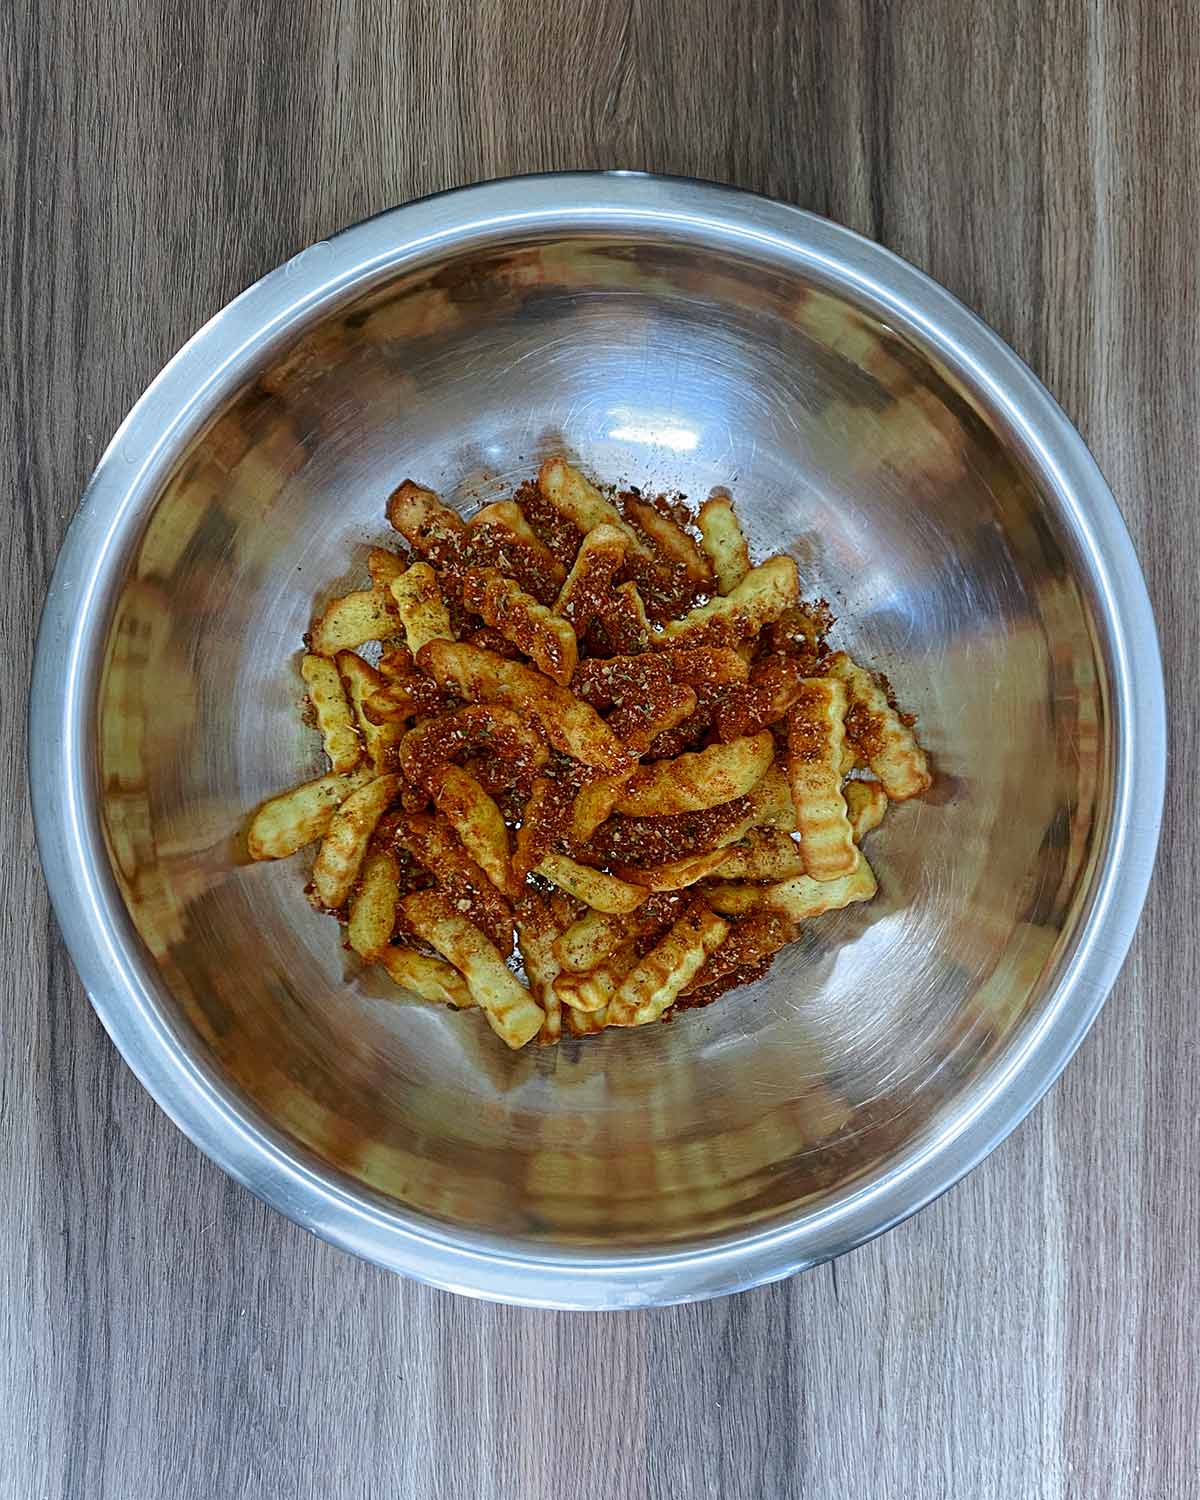 Cooked chips coated in seasoning in a metal bowl.